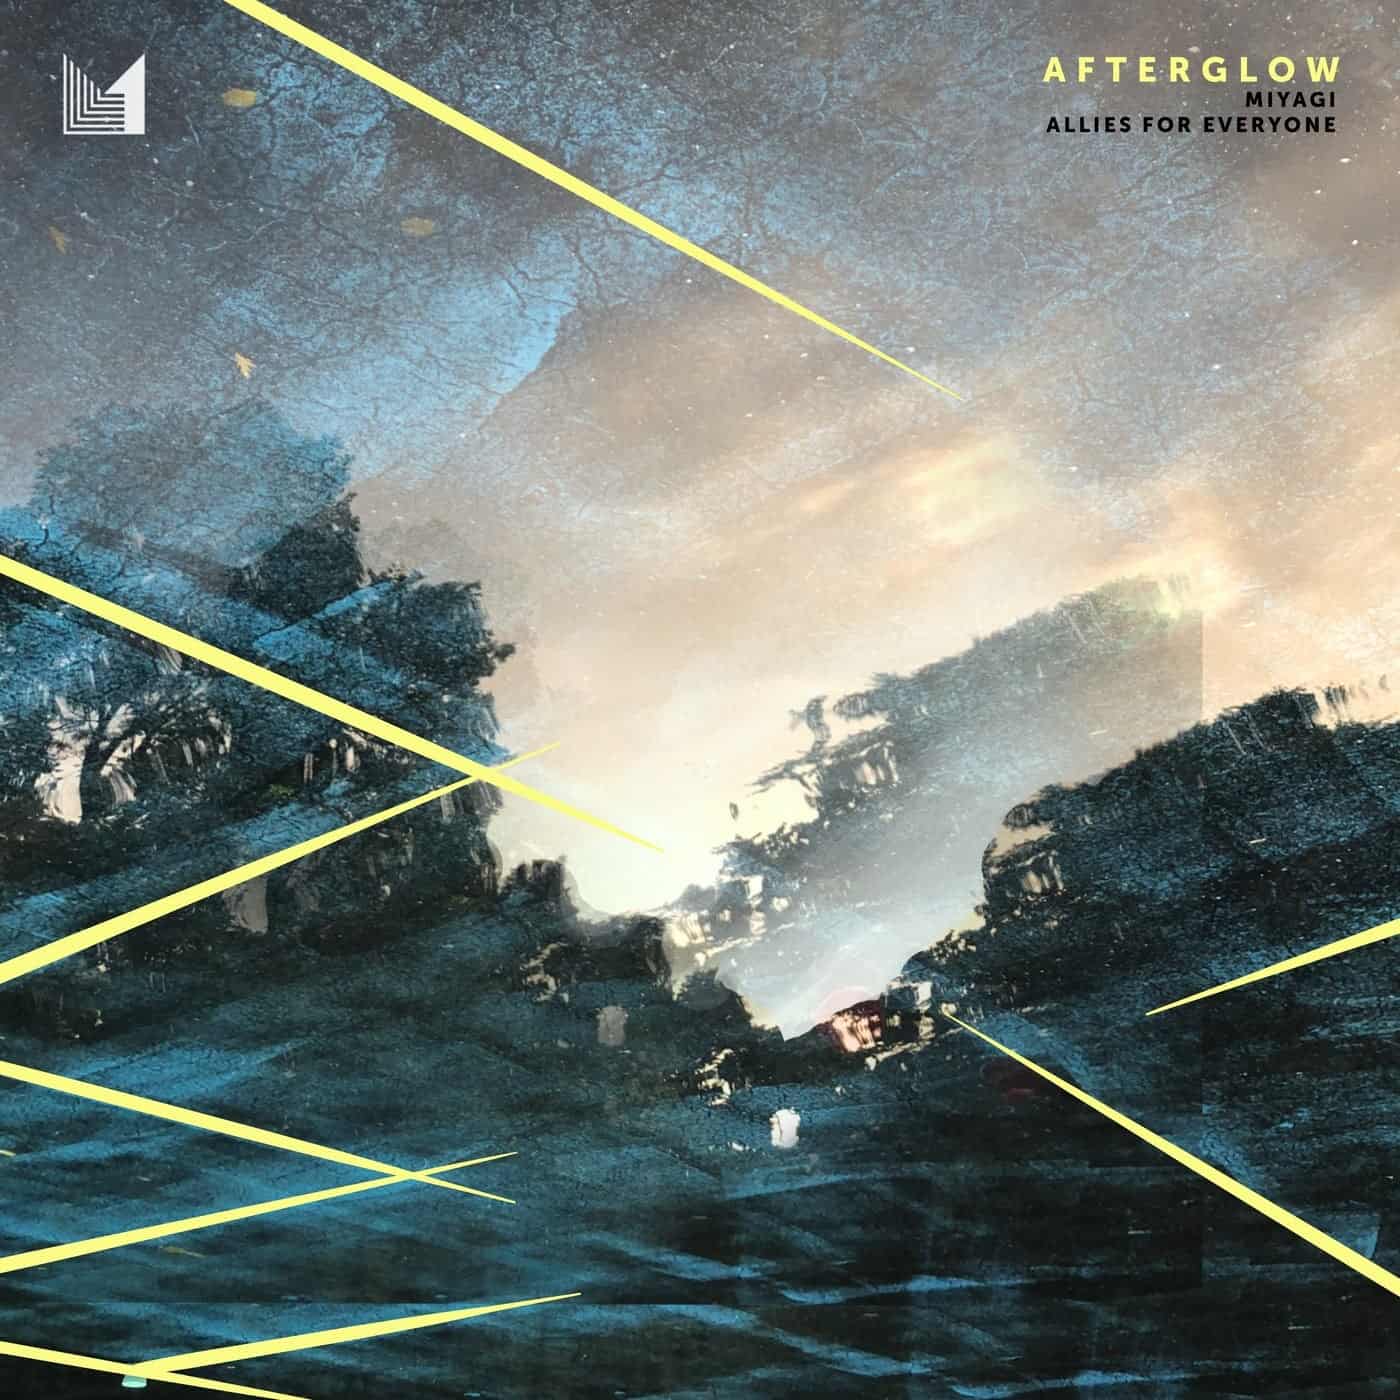 Download Miyagi, Allies for Everyone - Afterglow on Electrobuzz